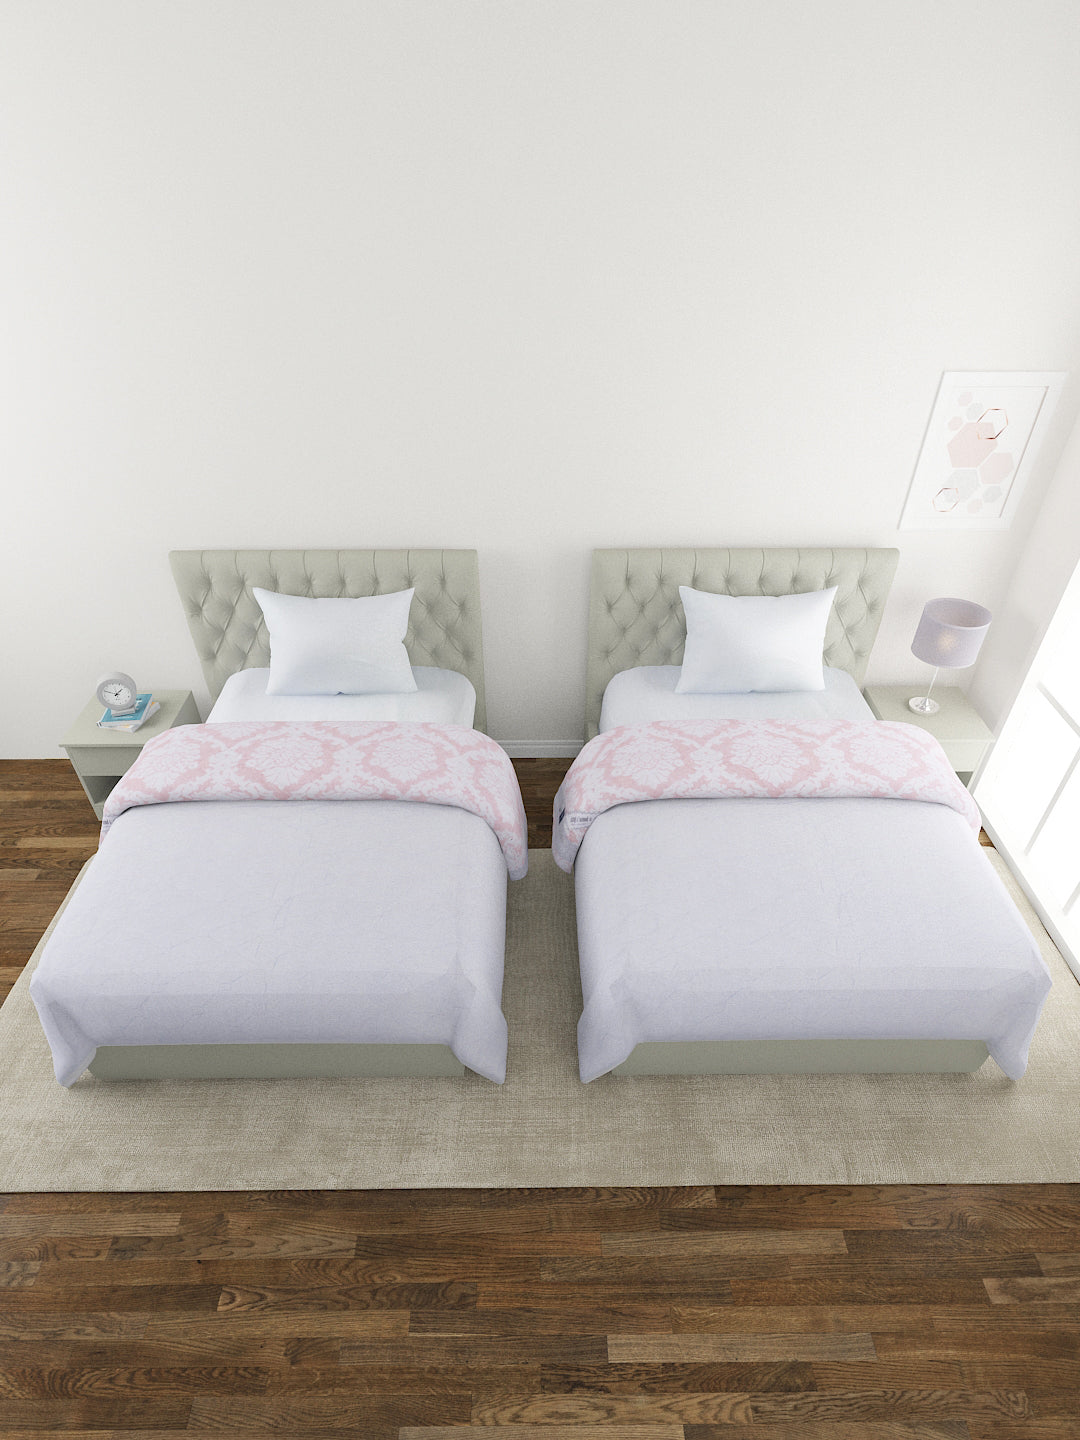 Floral Print Set of 2 Single Bed Light Weight Comforter- Pink and White